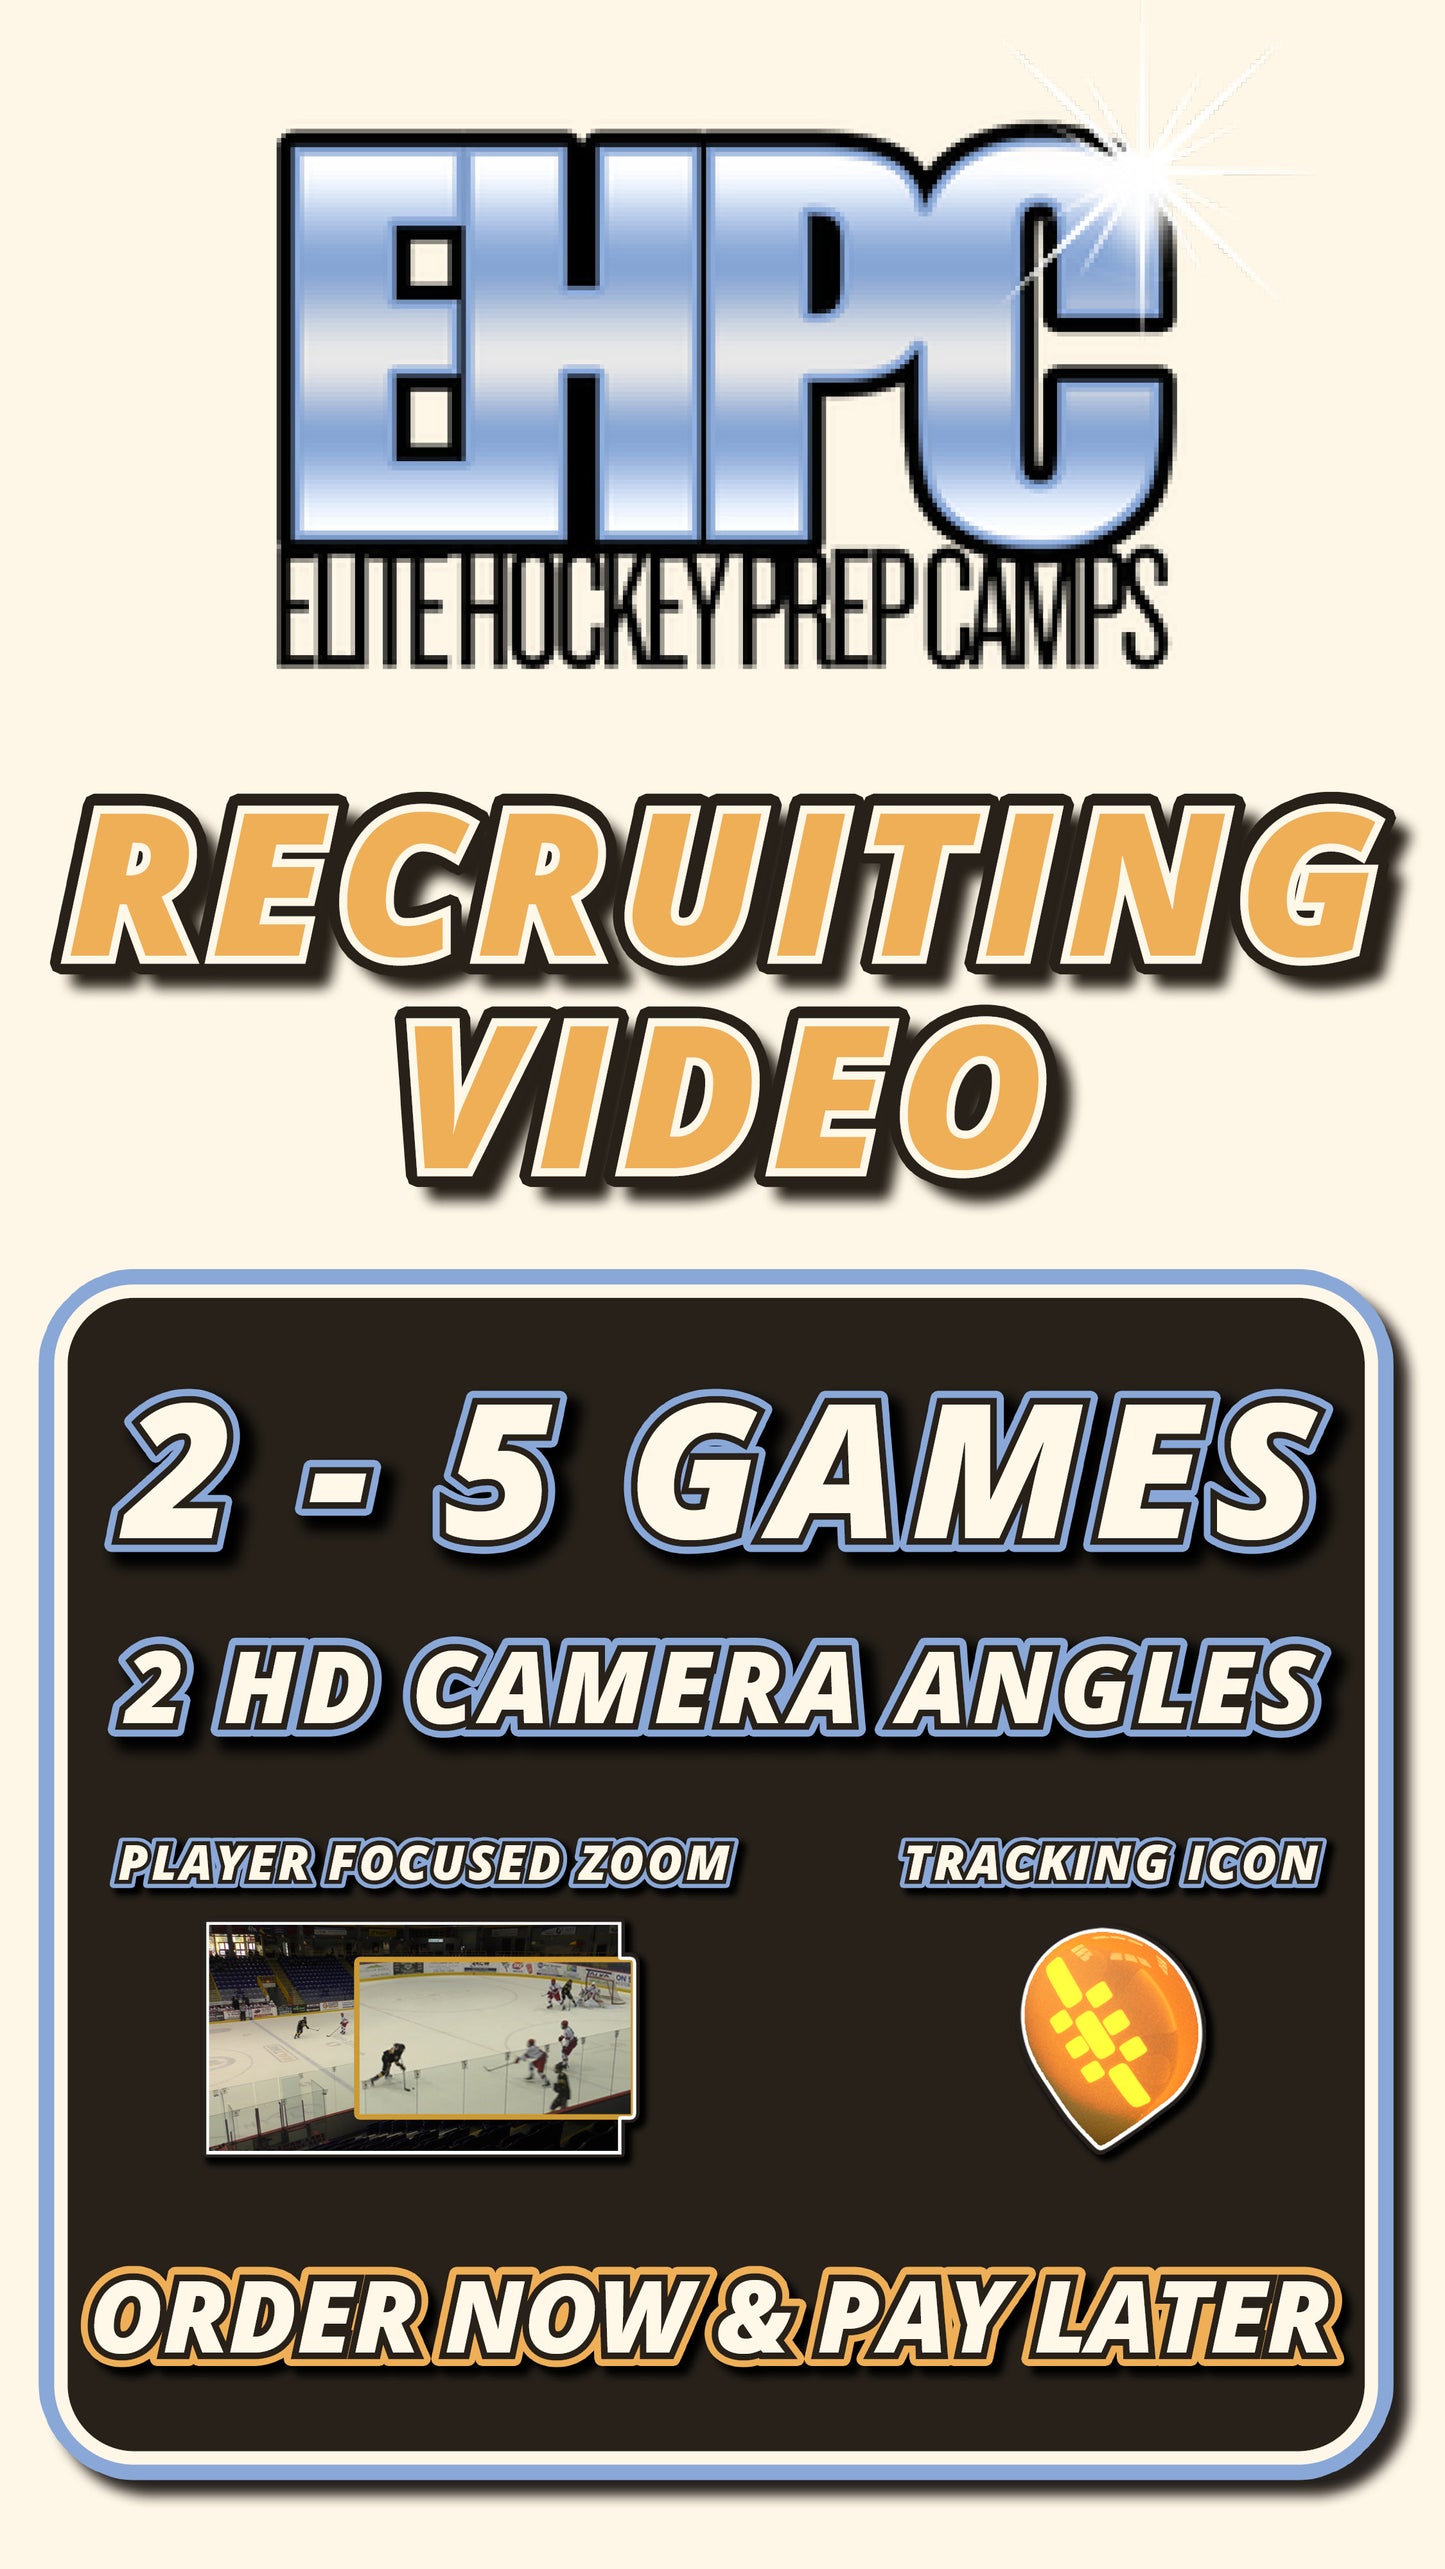 Recruiting video from Elite Hockey Prep Camp